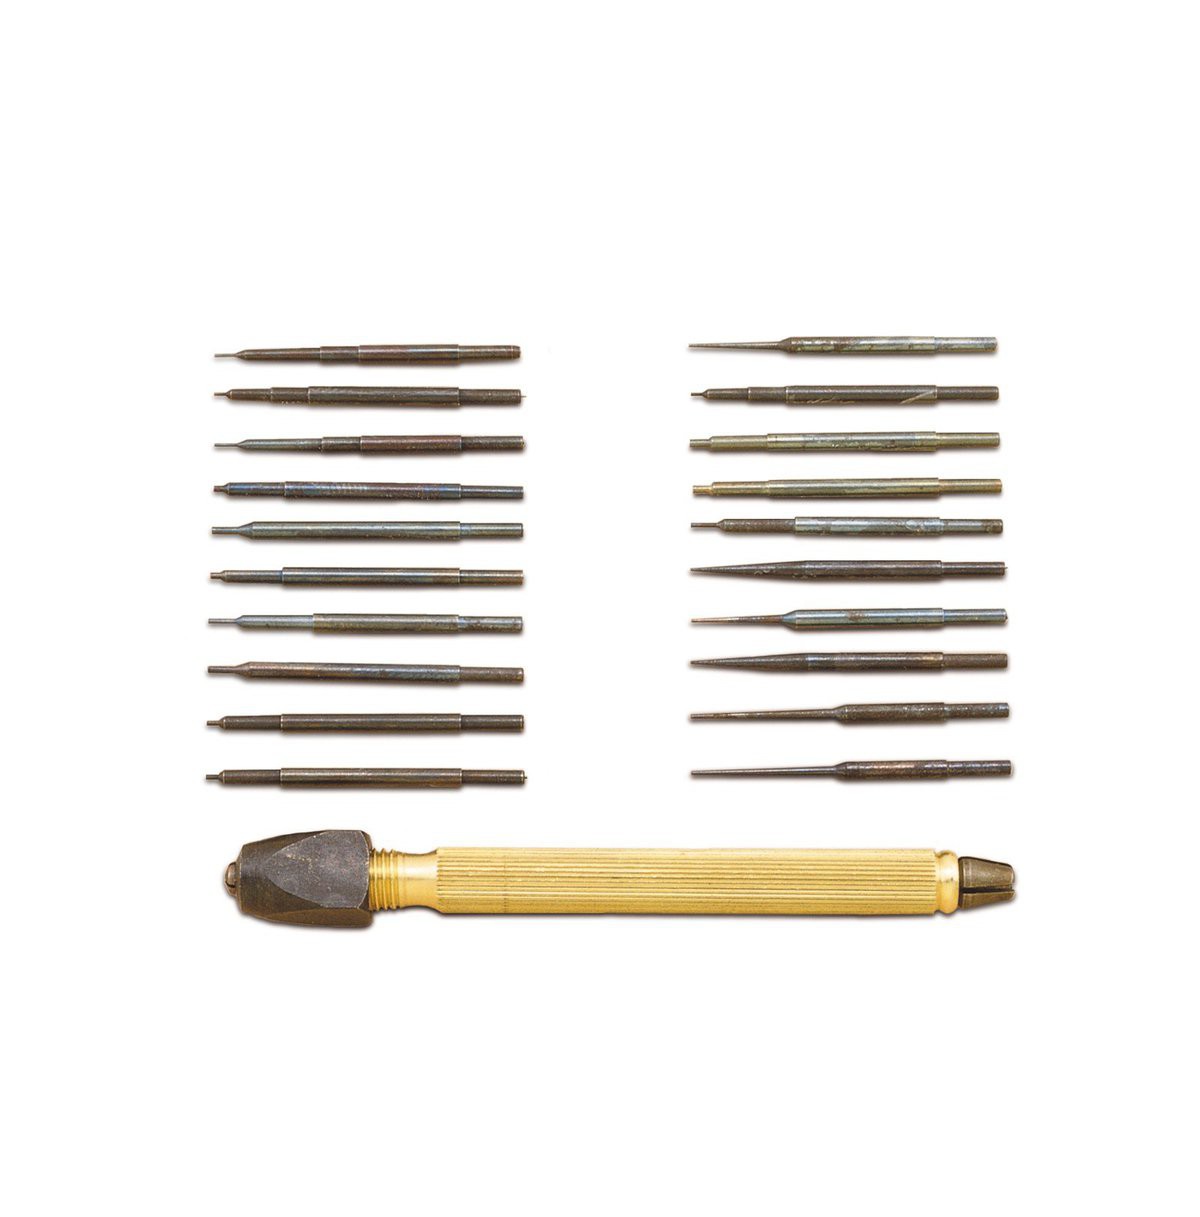 Set of 20 Pin Punches